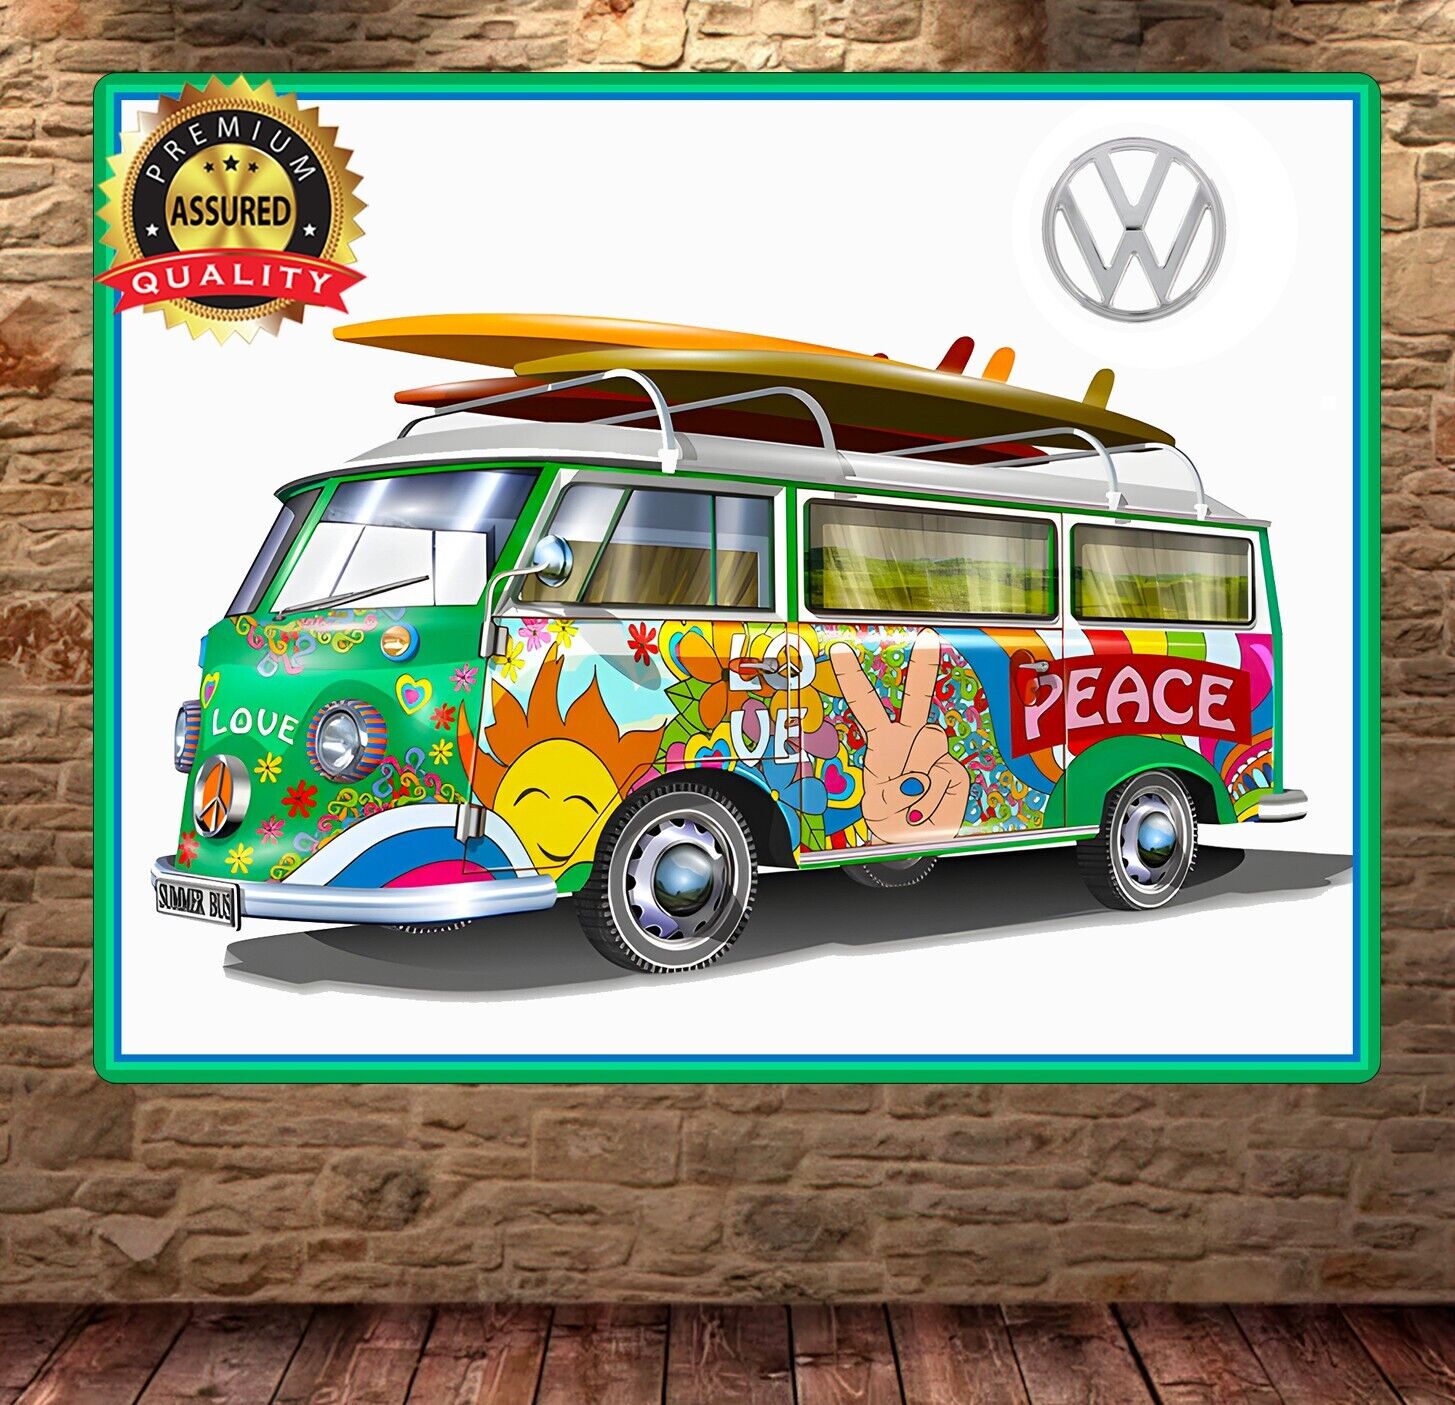 Volkswagen Bus - Early 70s - Love, Peace - Metal Sign 11 x 14